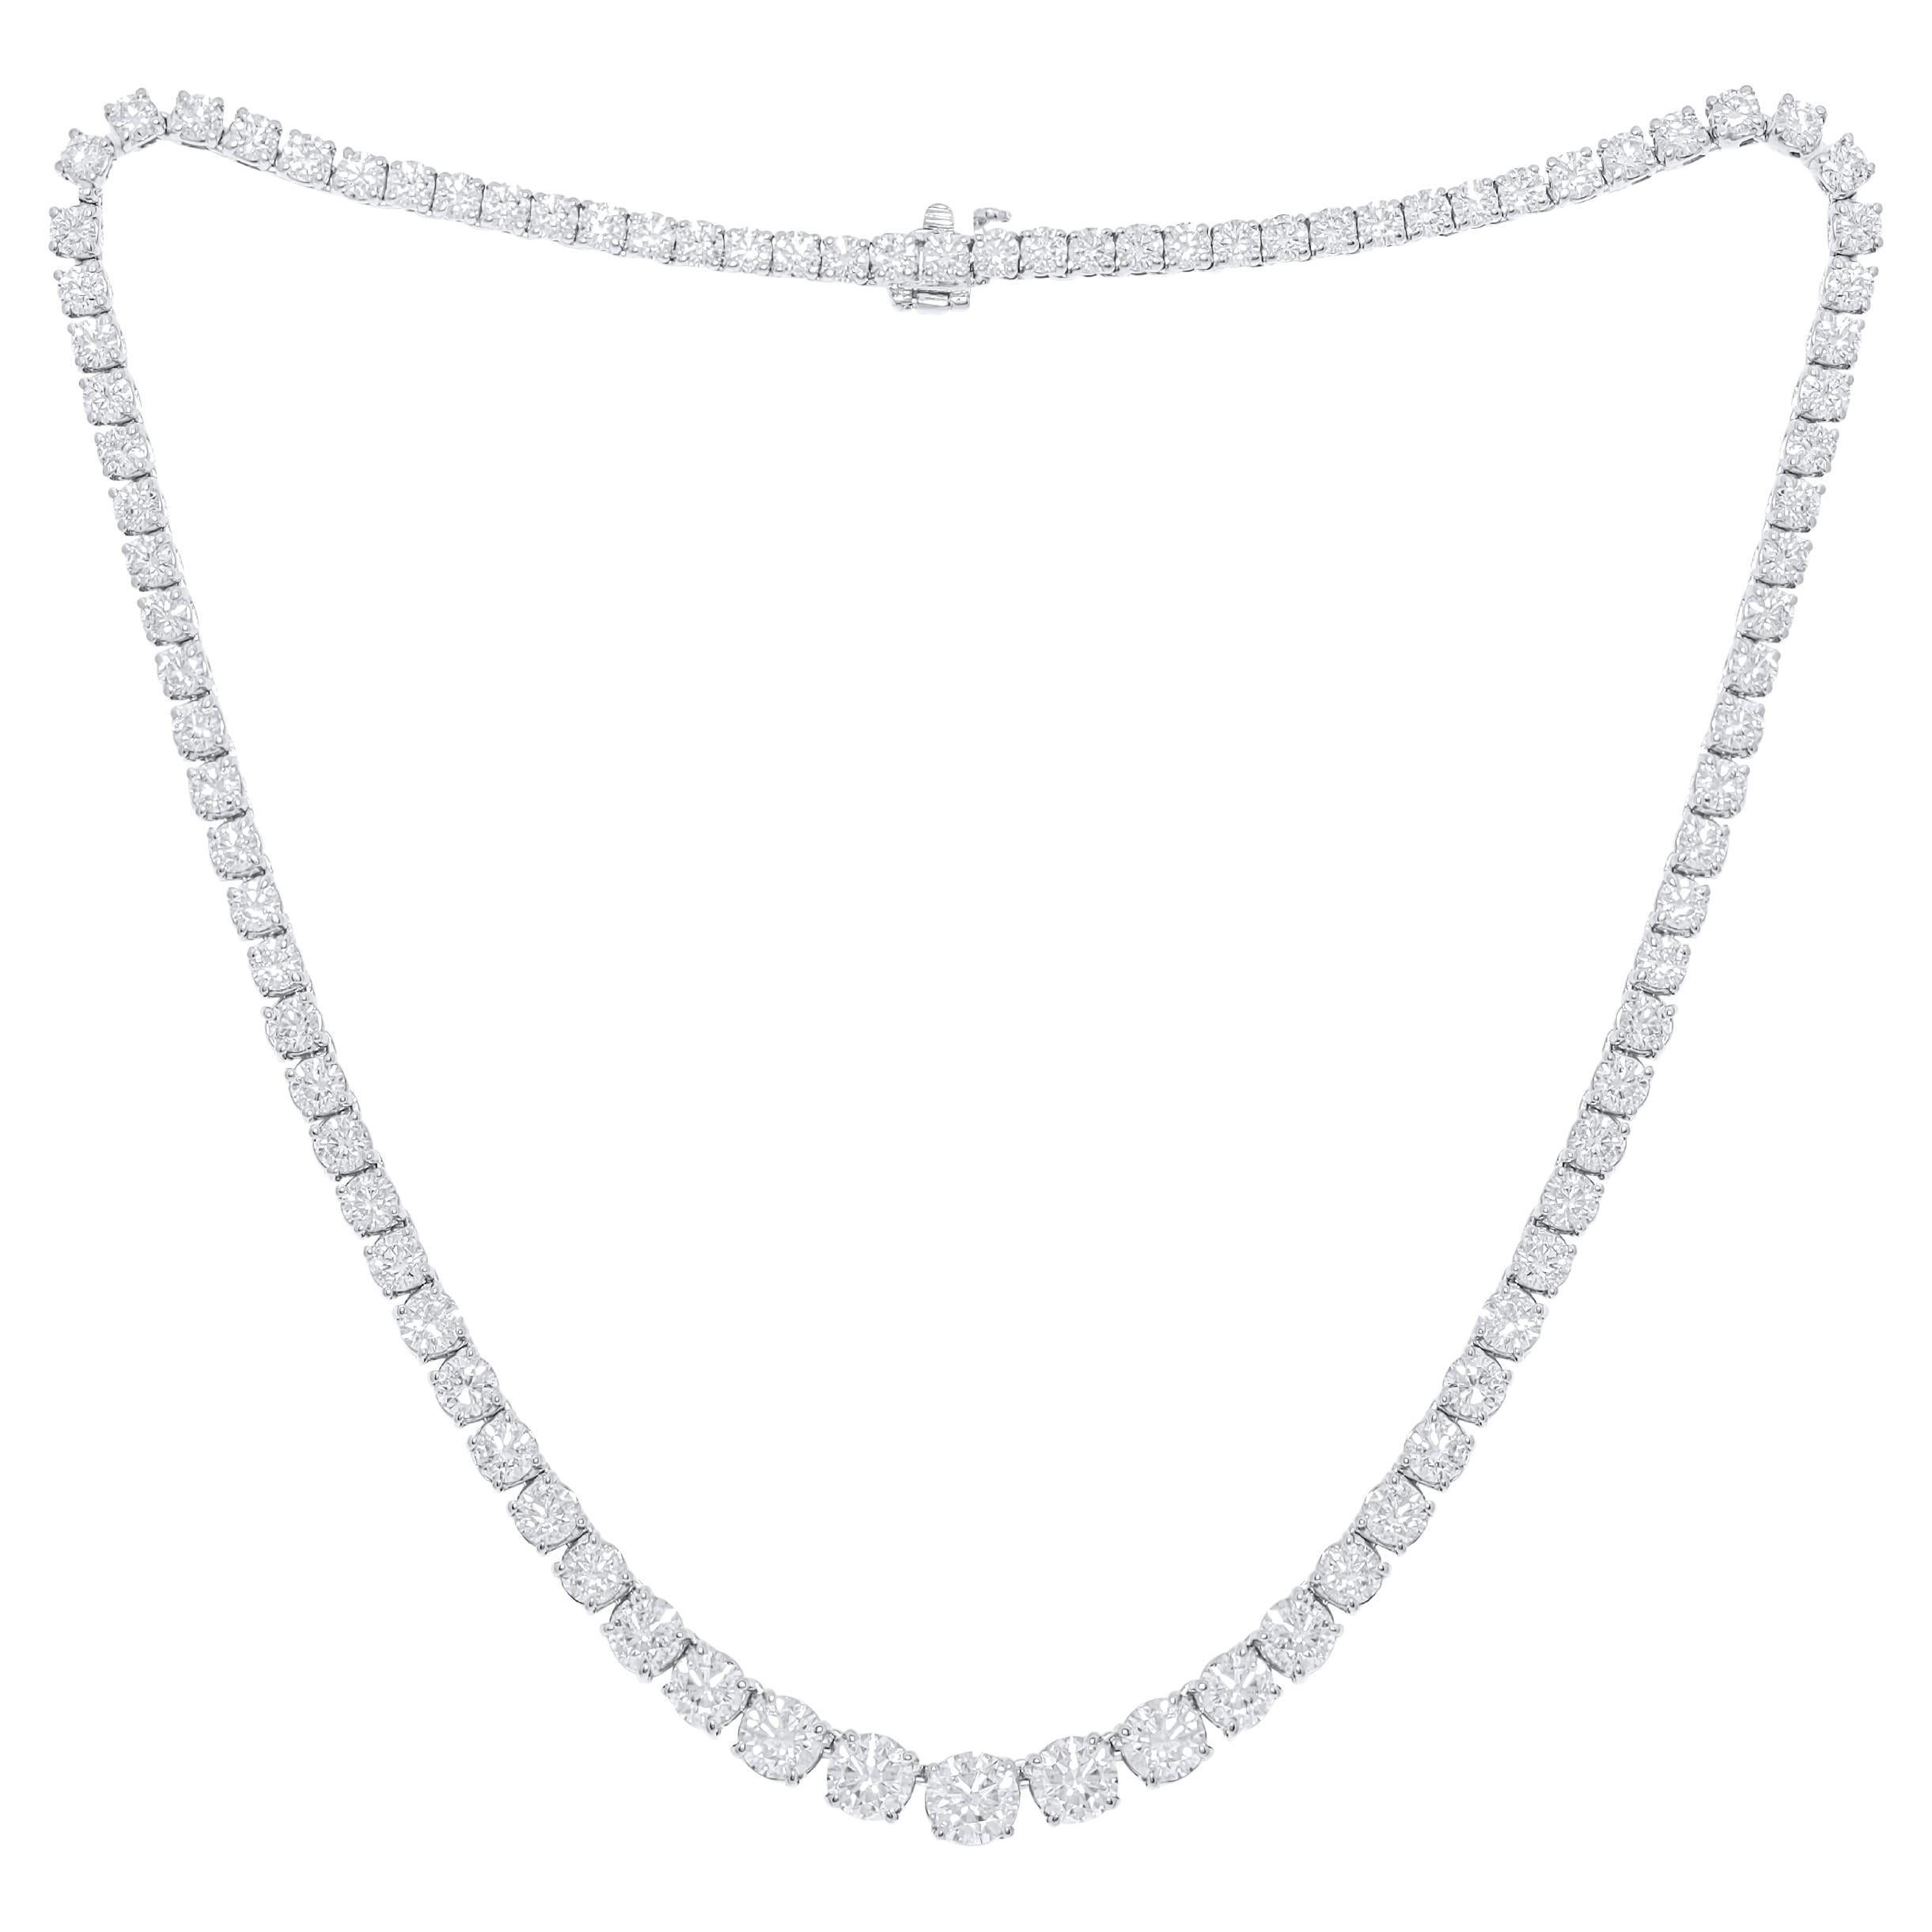 Diana M. 14kt White Gold Graduated Reviera Tennis Necklace  20.00 cts prong